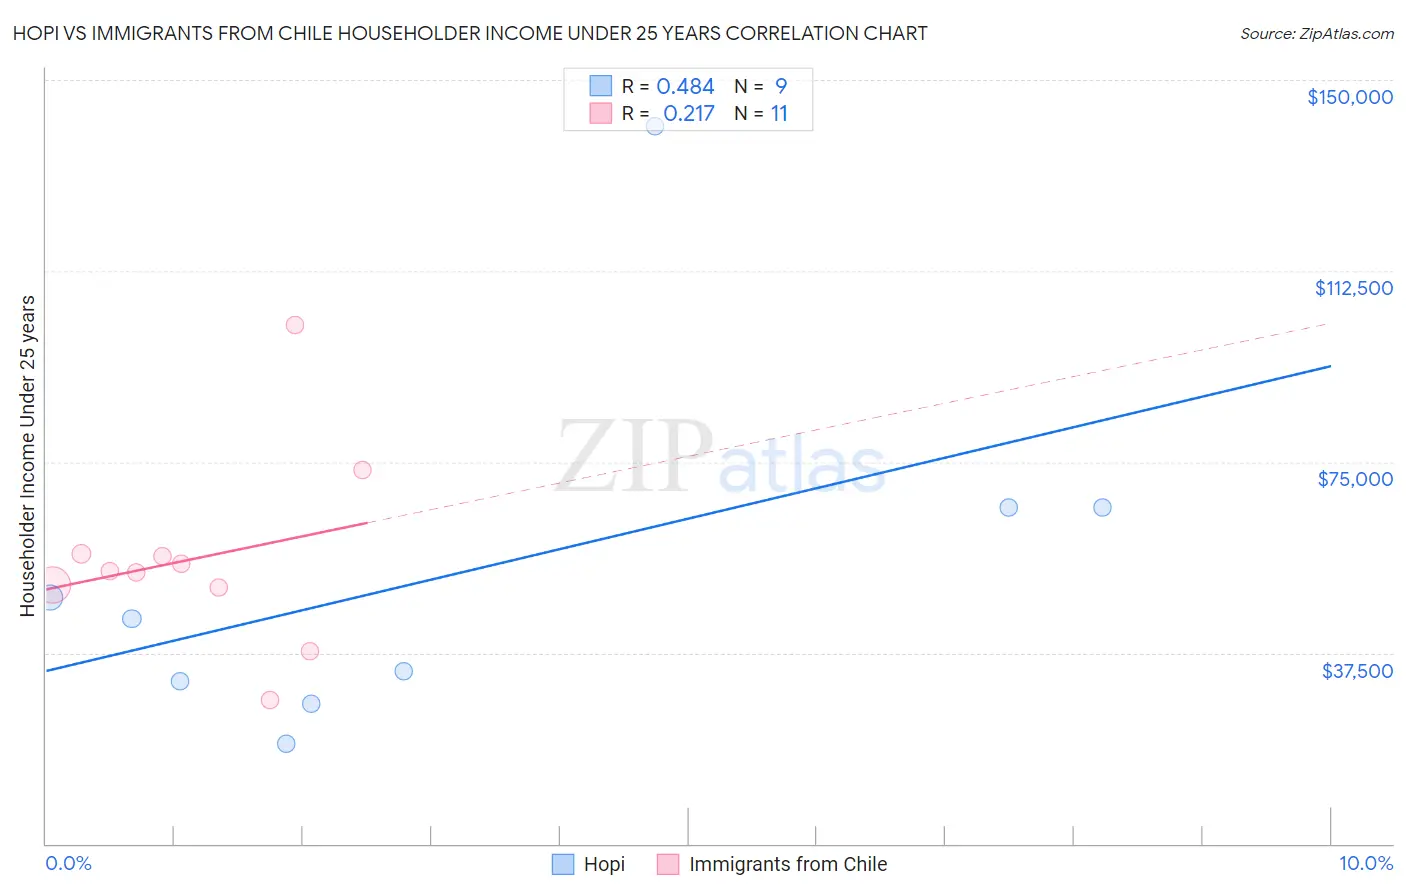 Hopi vs Immigrants from Chile Householder Income Under 25 years